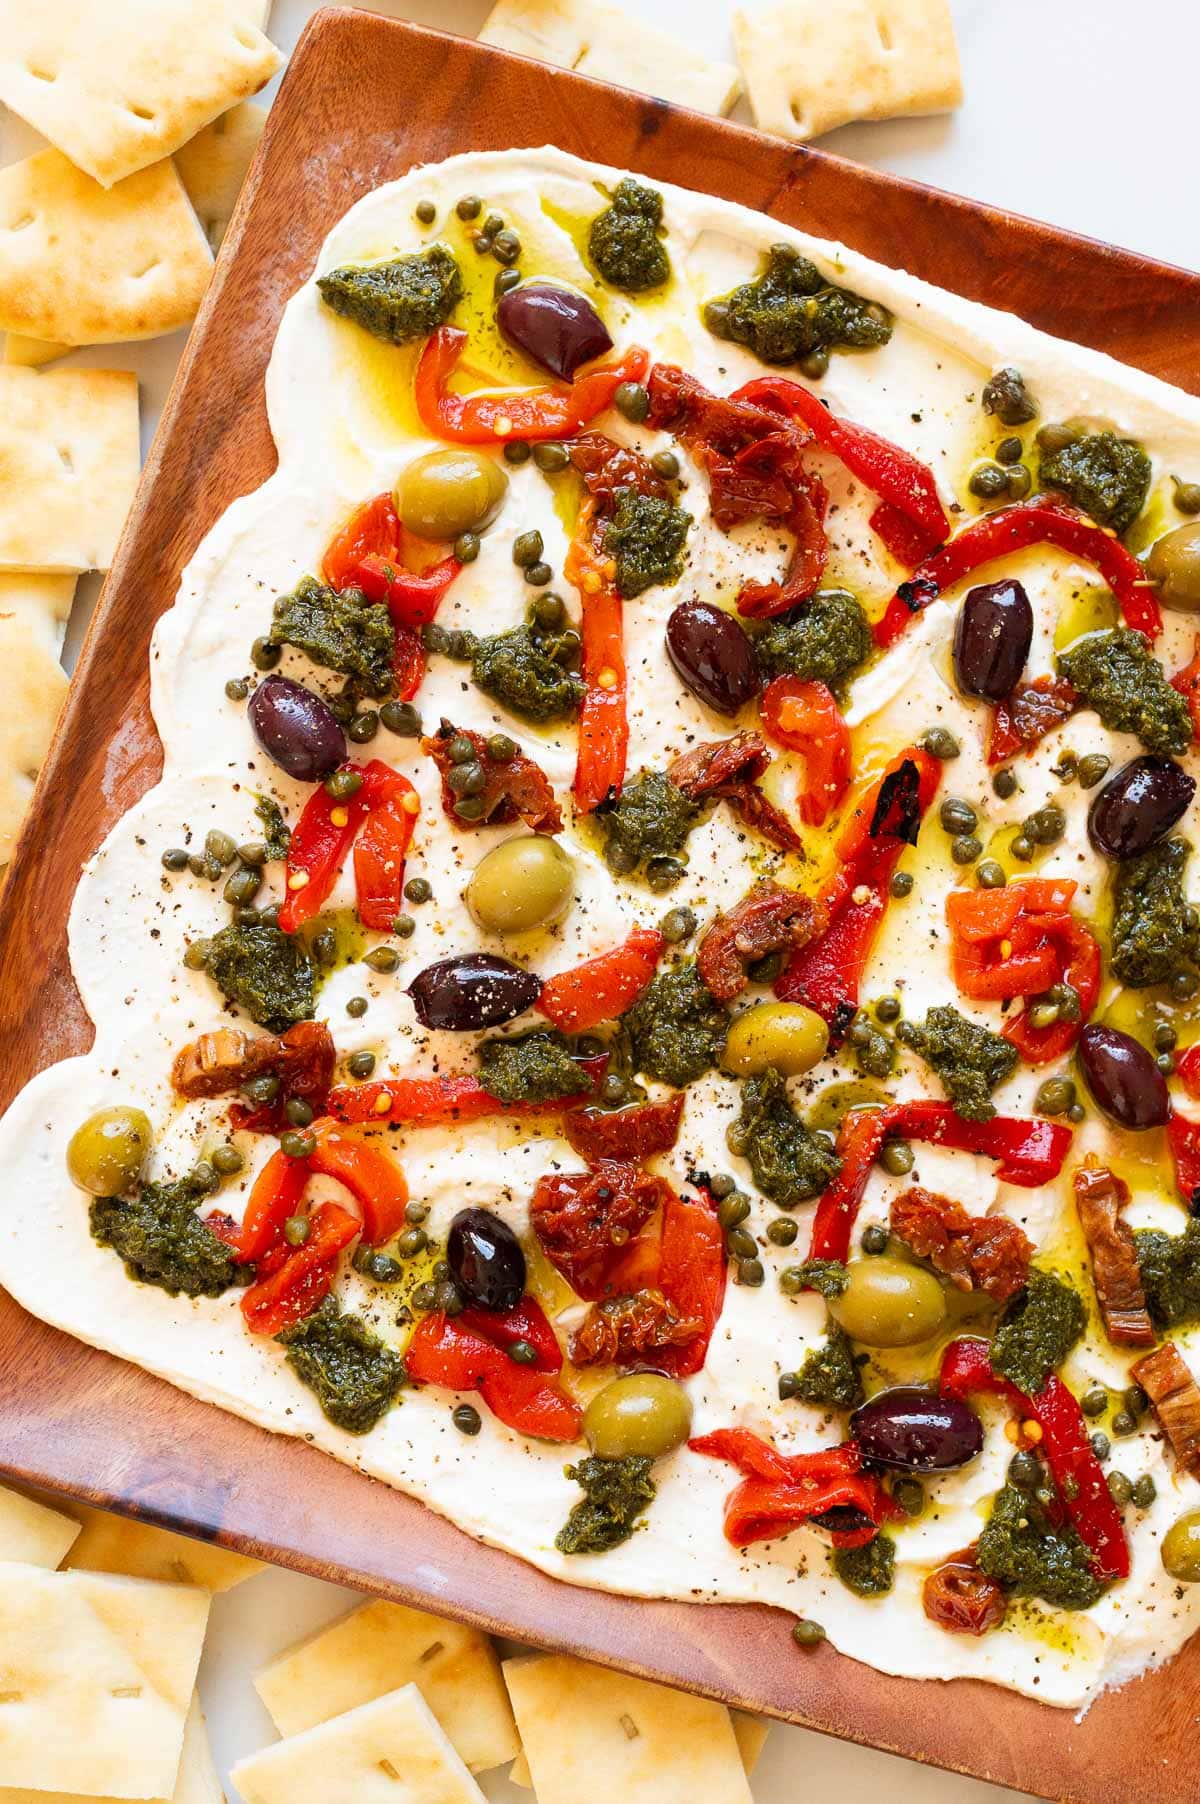 Whipped feta board with olived, capers and sun dried tomatoes served with pita bread.